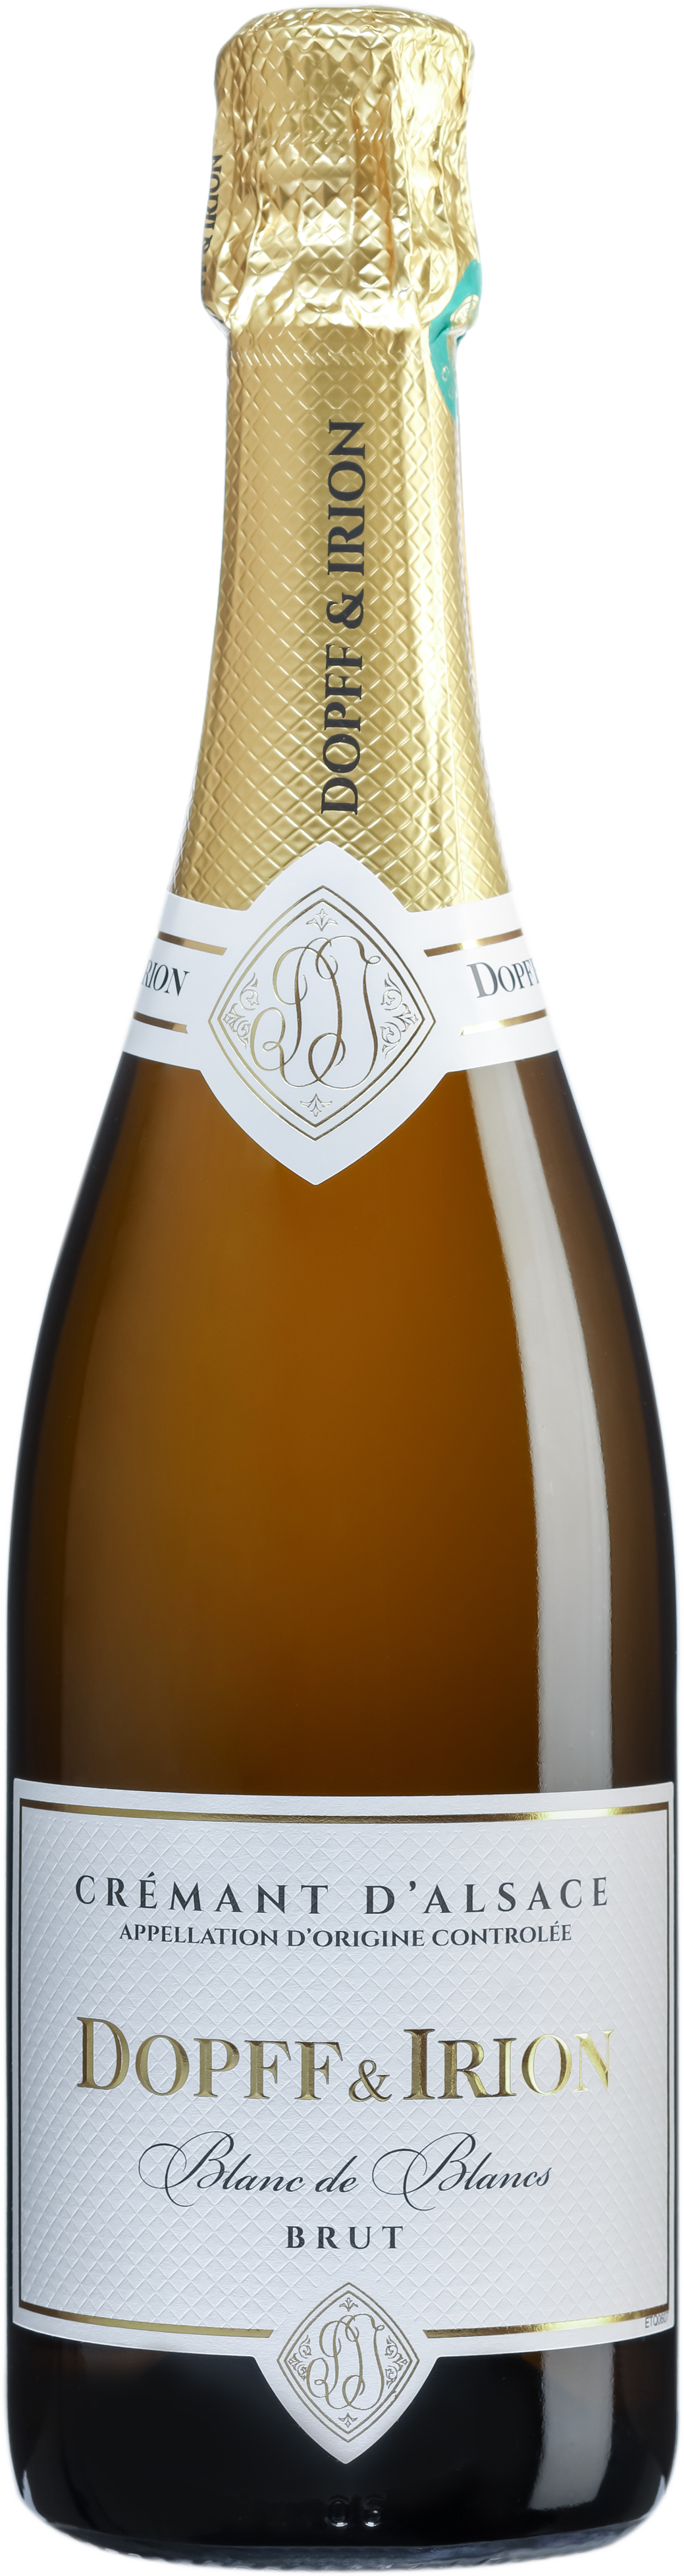 Dopff & Irion Crémant d'Alsace Brut null - onesize - 1